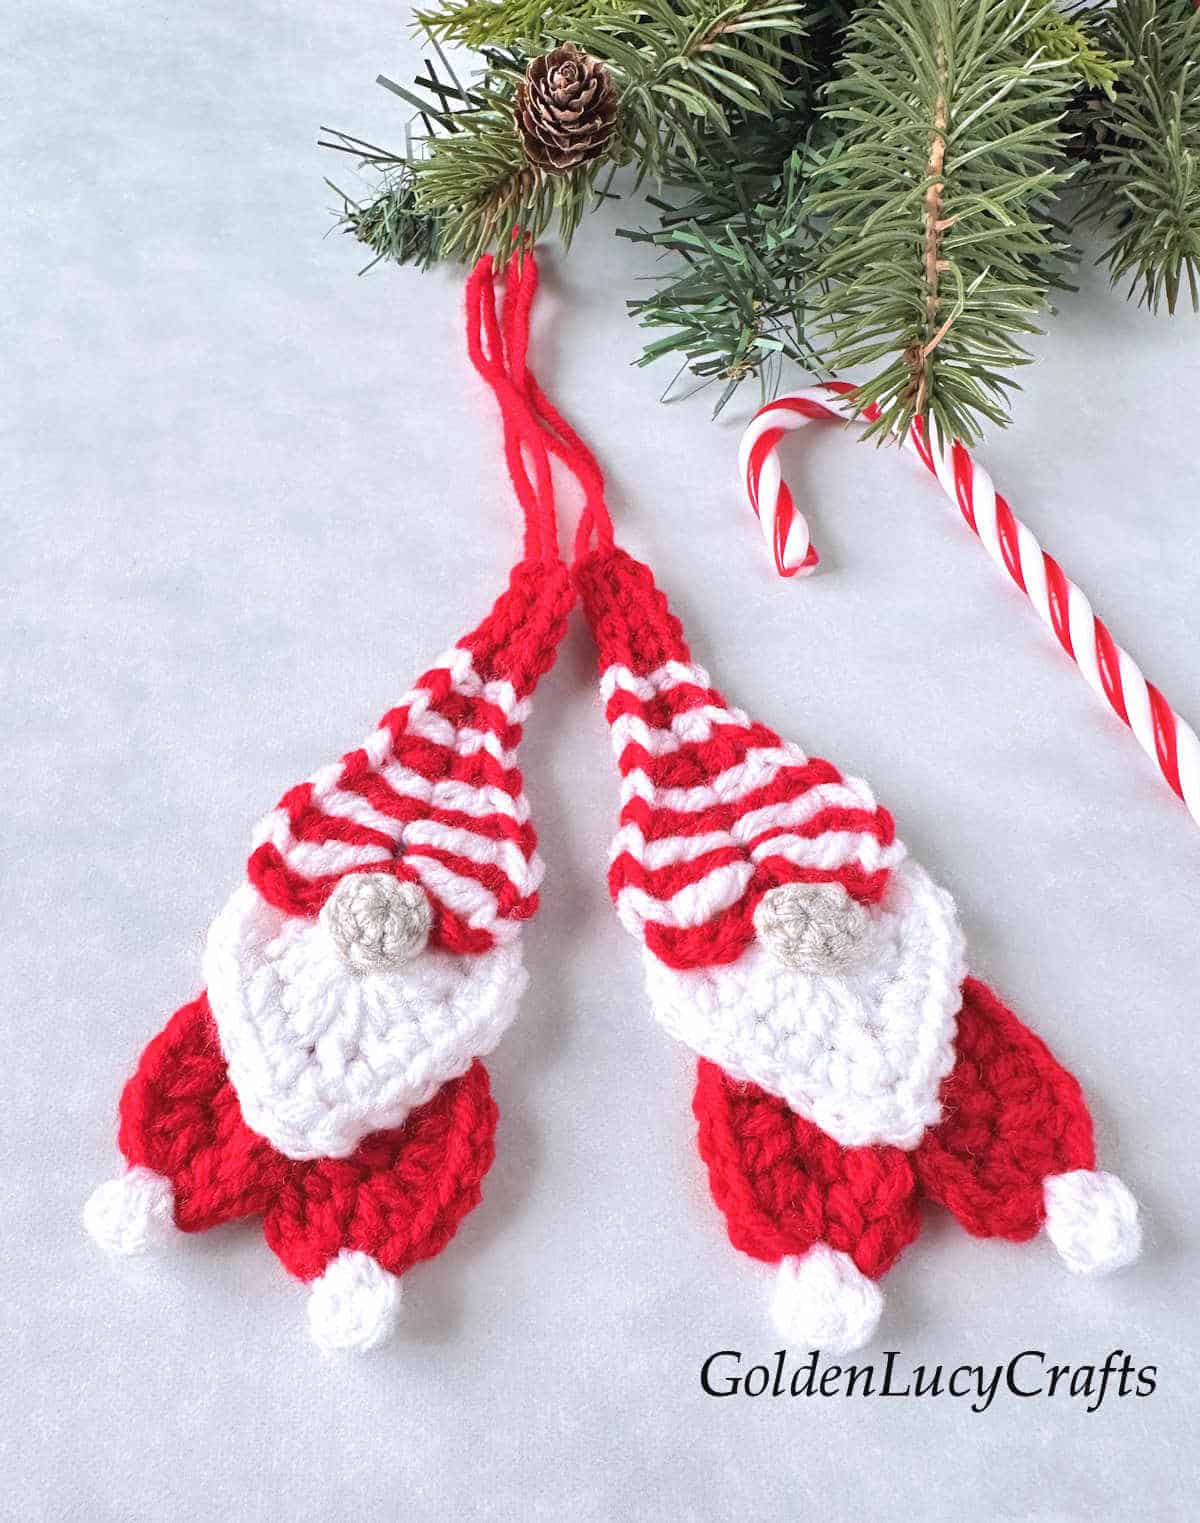 Two crocheted gnomes and candy cane next to them.